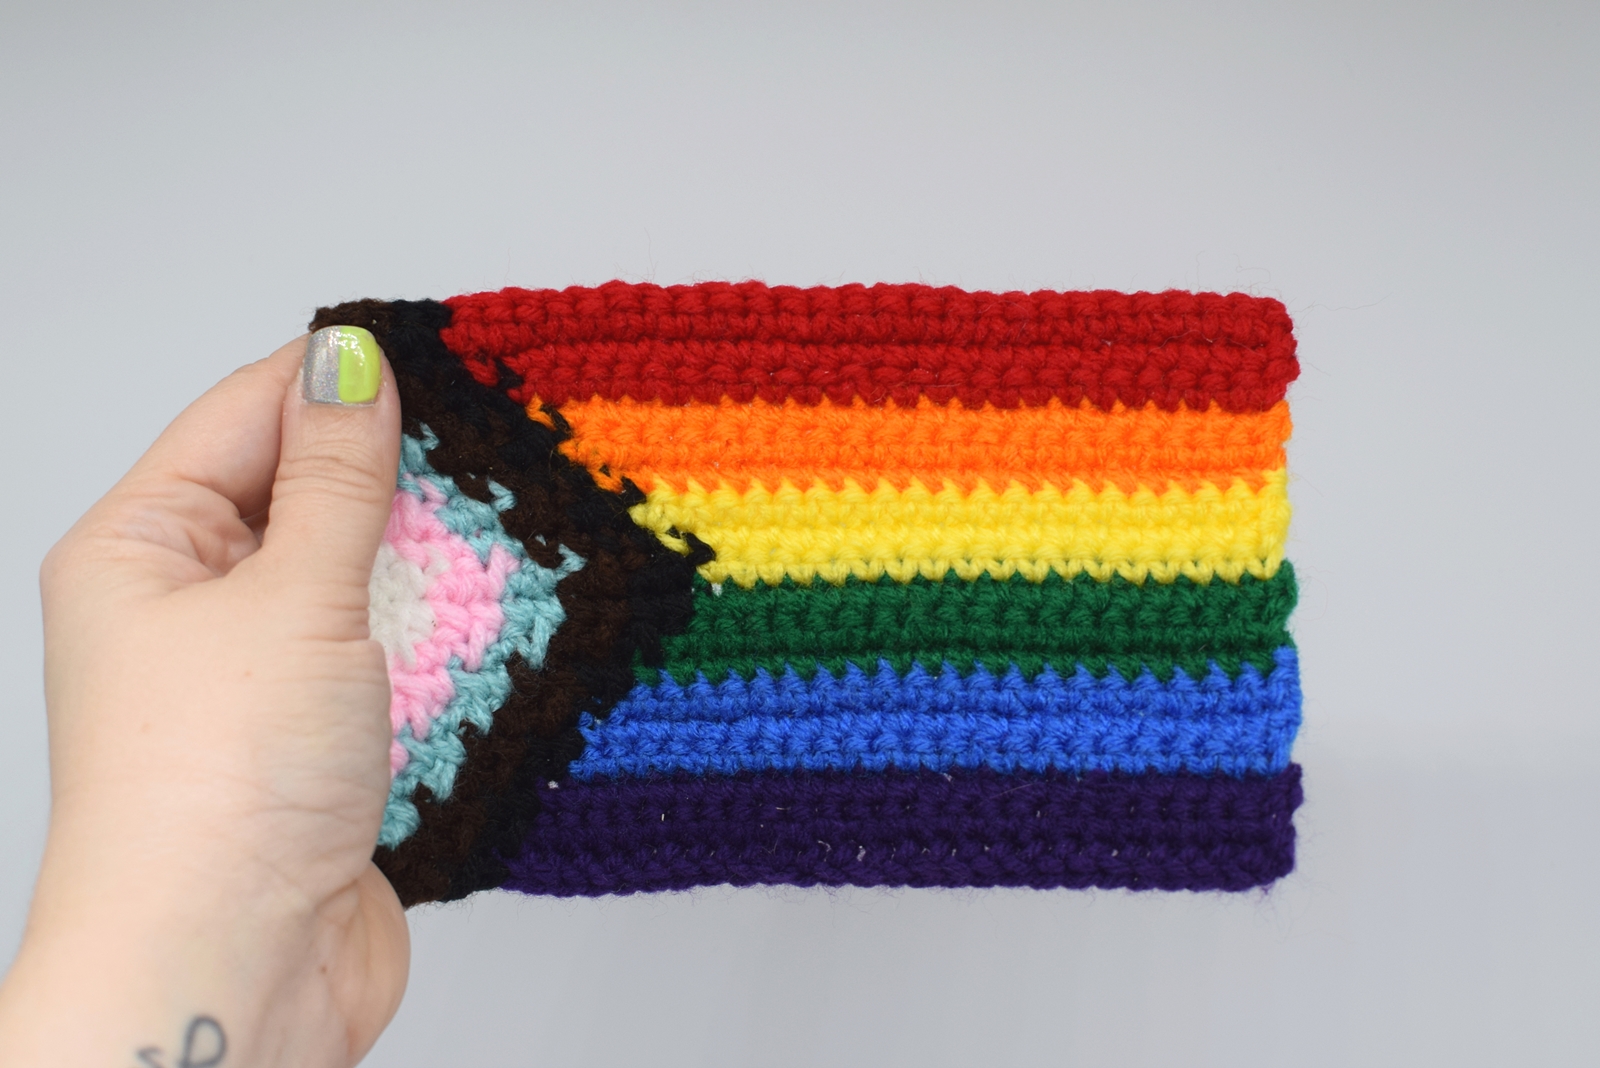 Crocheted rainbow Pride Progress flag held by a hand on a white background